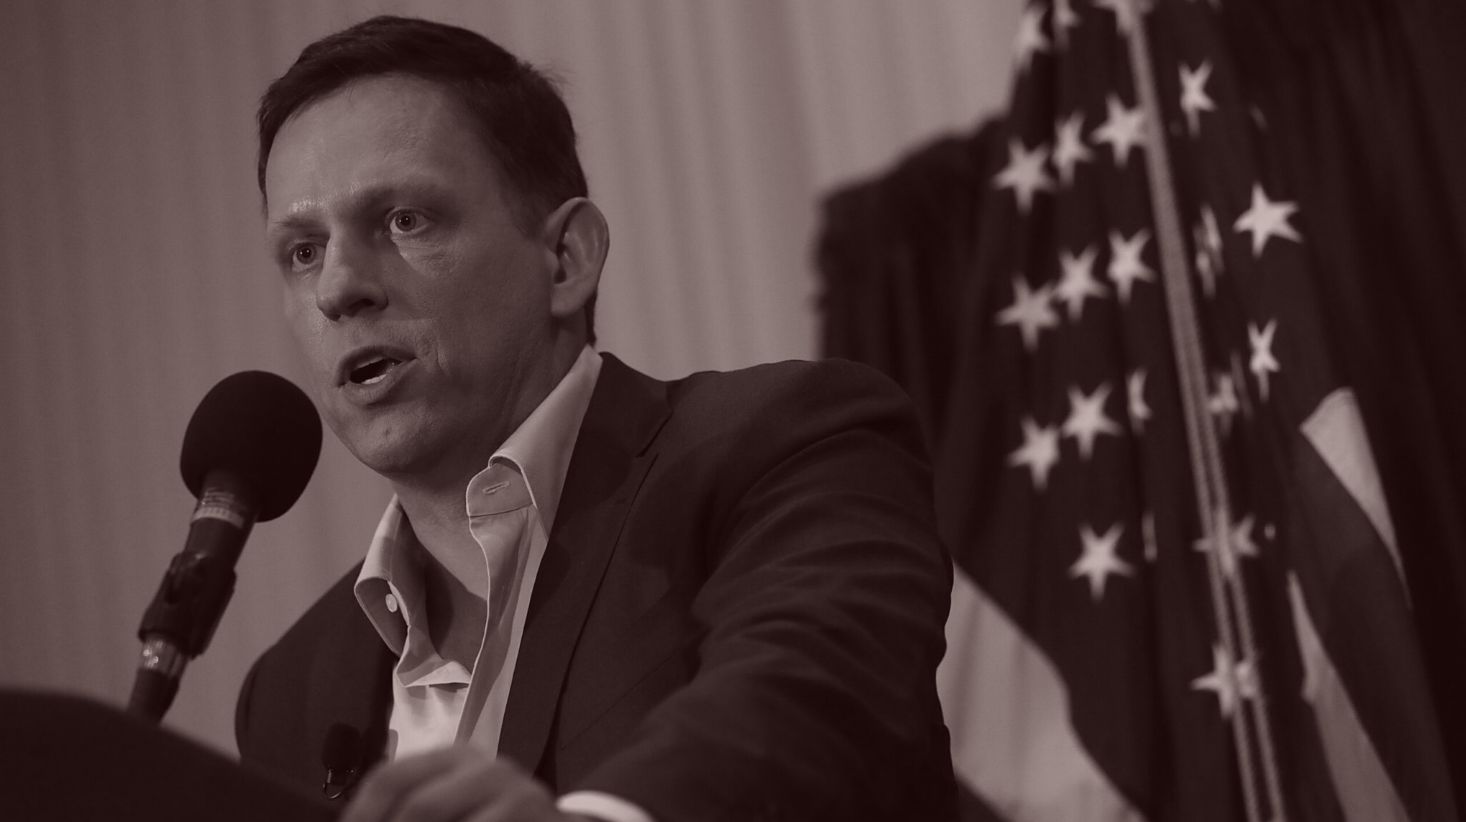 Can Thiel and McConnell Strike a Deal?